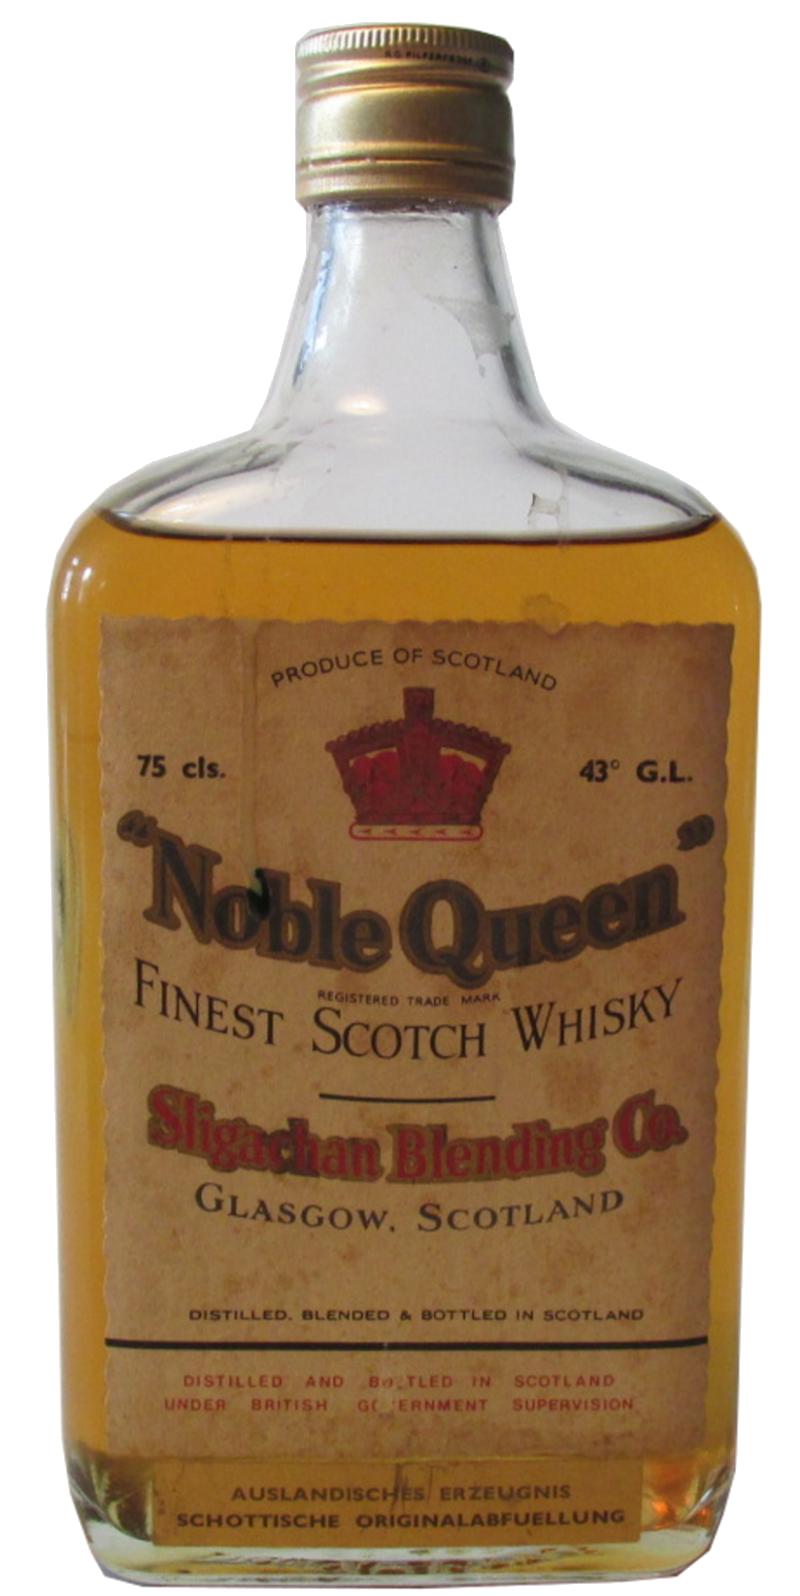 Noble Queen Finest Scotch Whisky SlBl